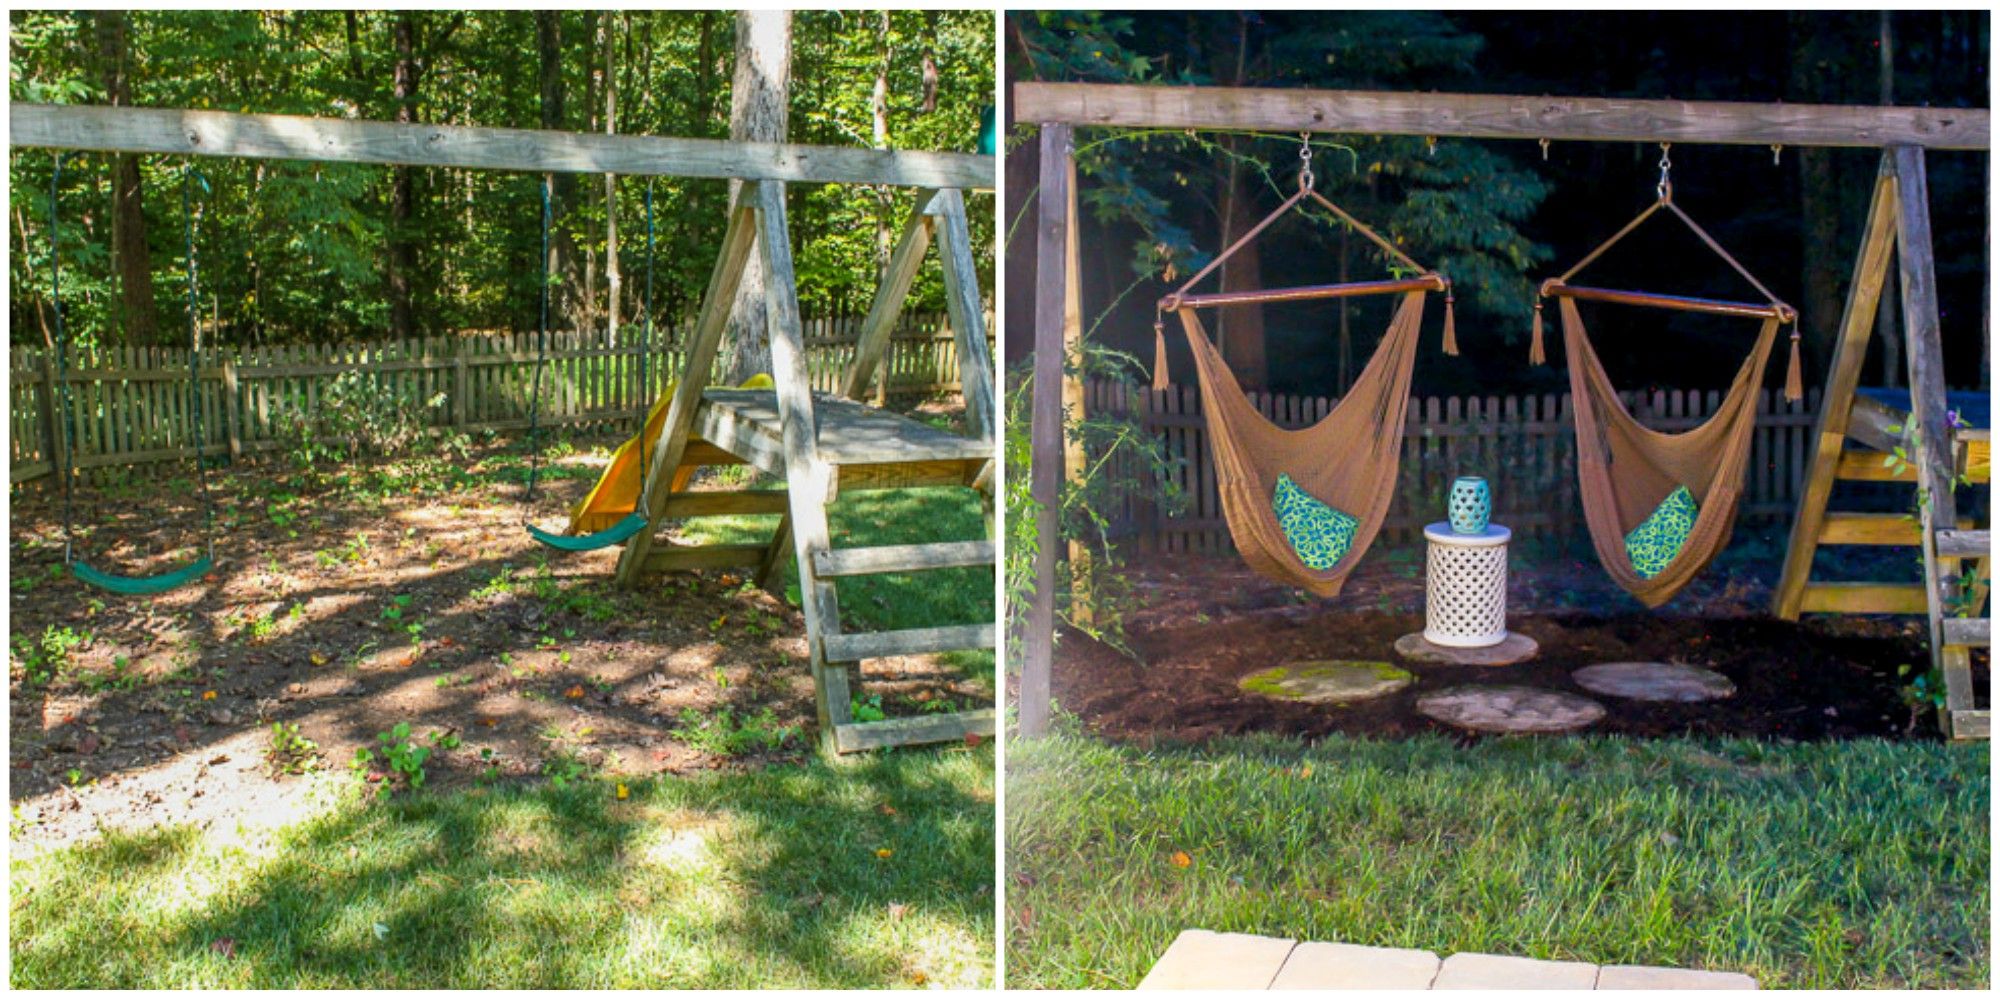 How to Make a DIY Grown-Up Swing Set - How to Transform a Kid's